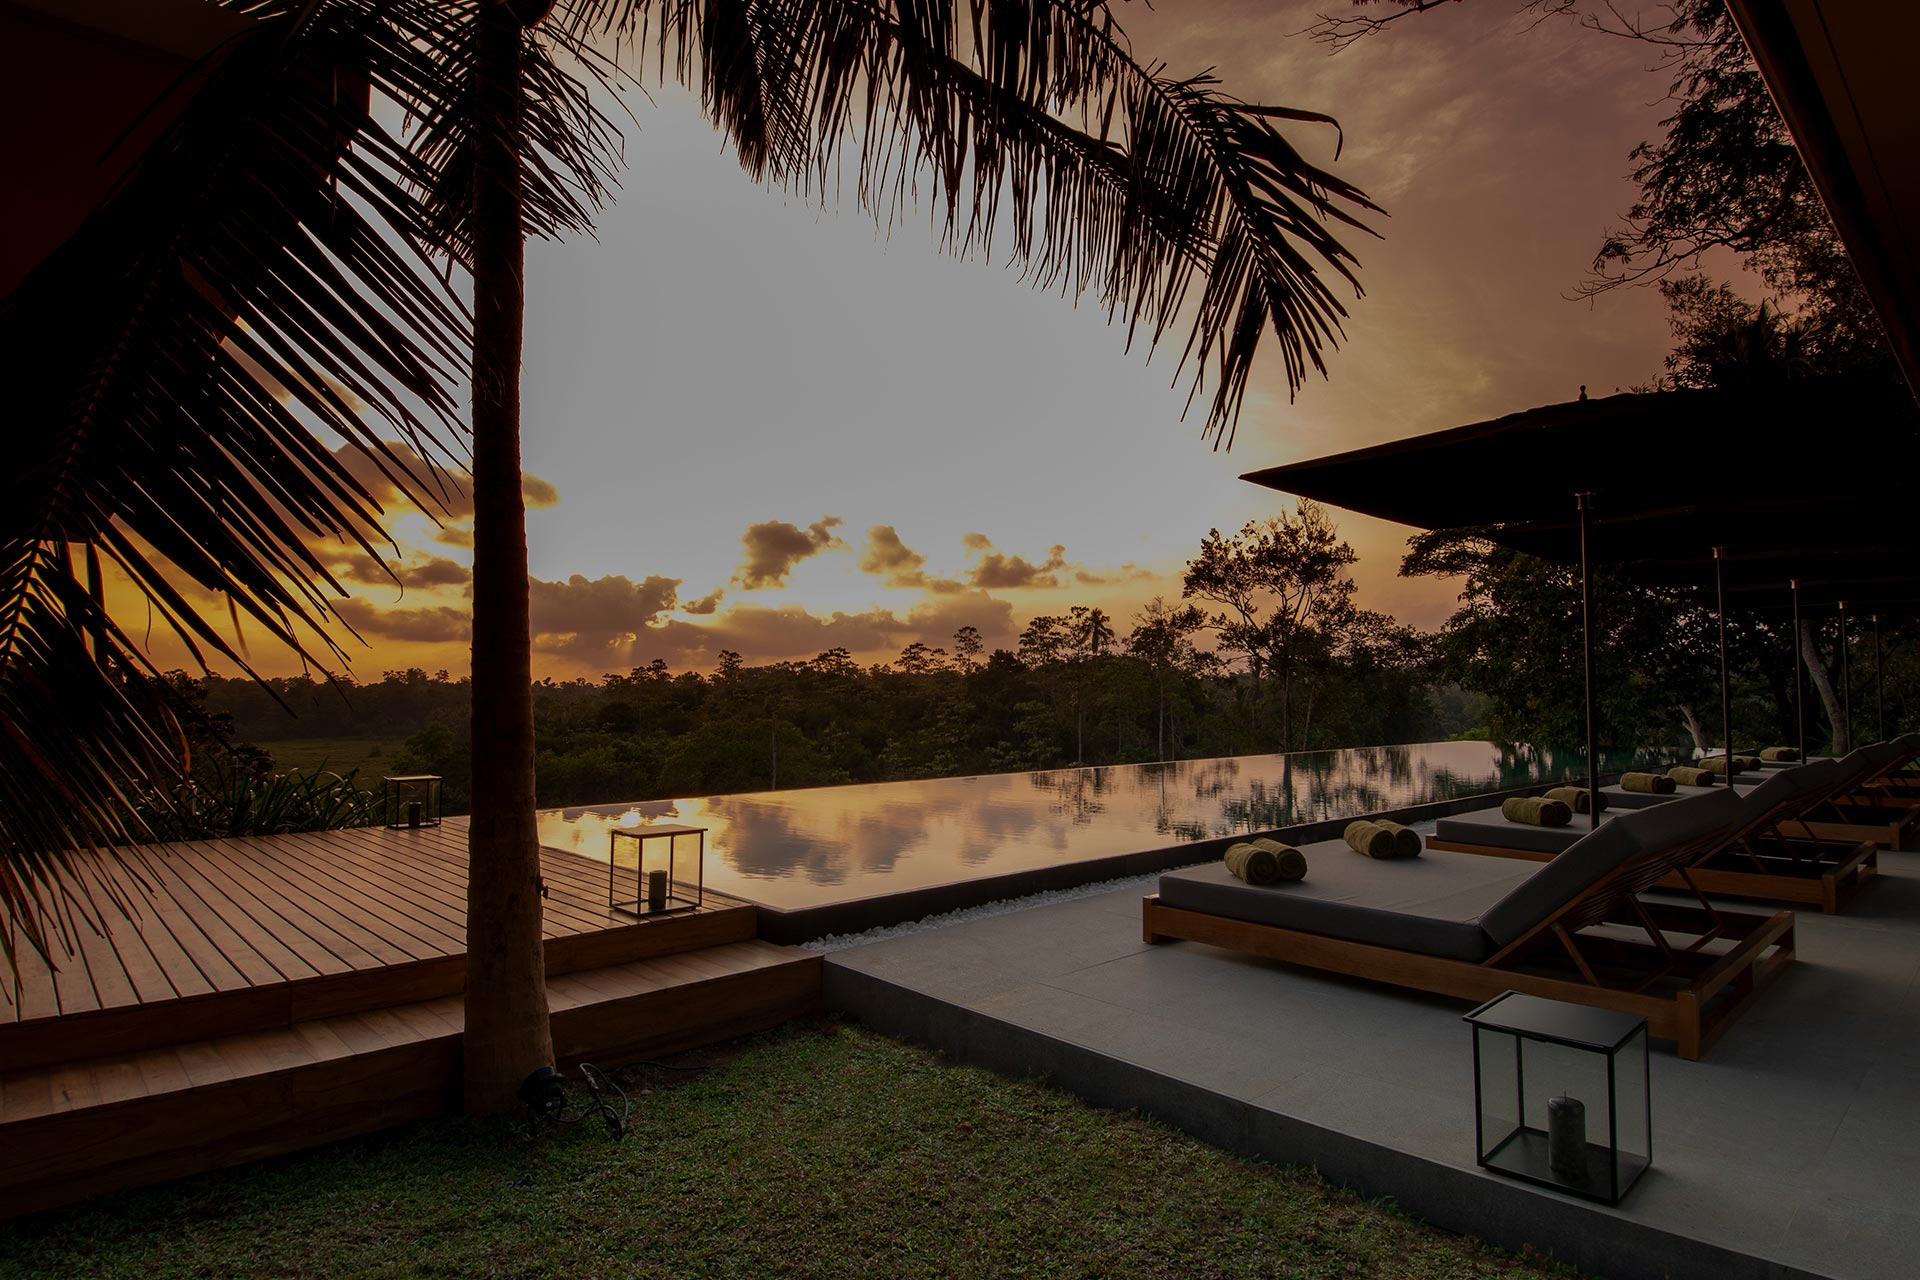 Sunset at Haritha Villa & Spa, overlooking the Saltwater pool with unhindered views